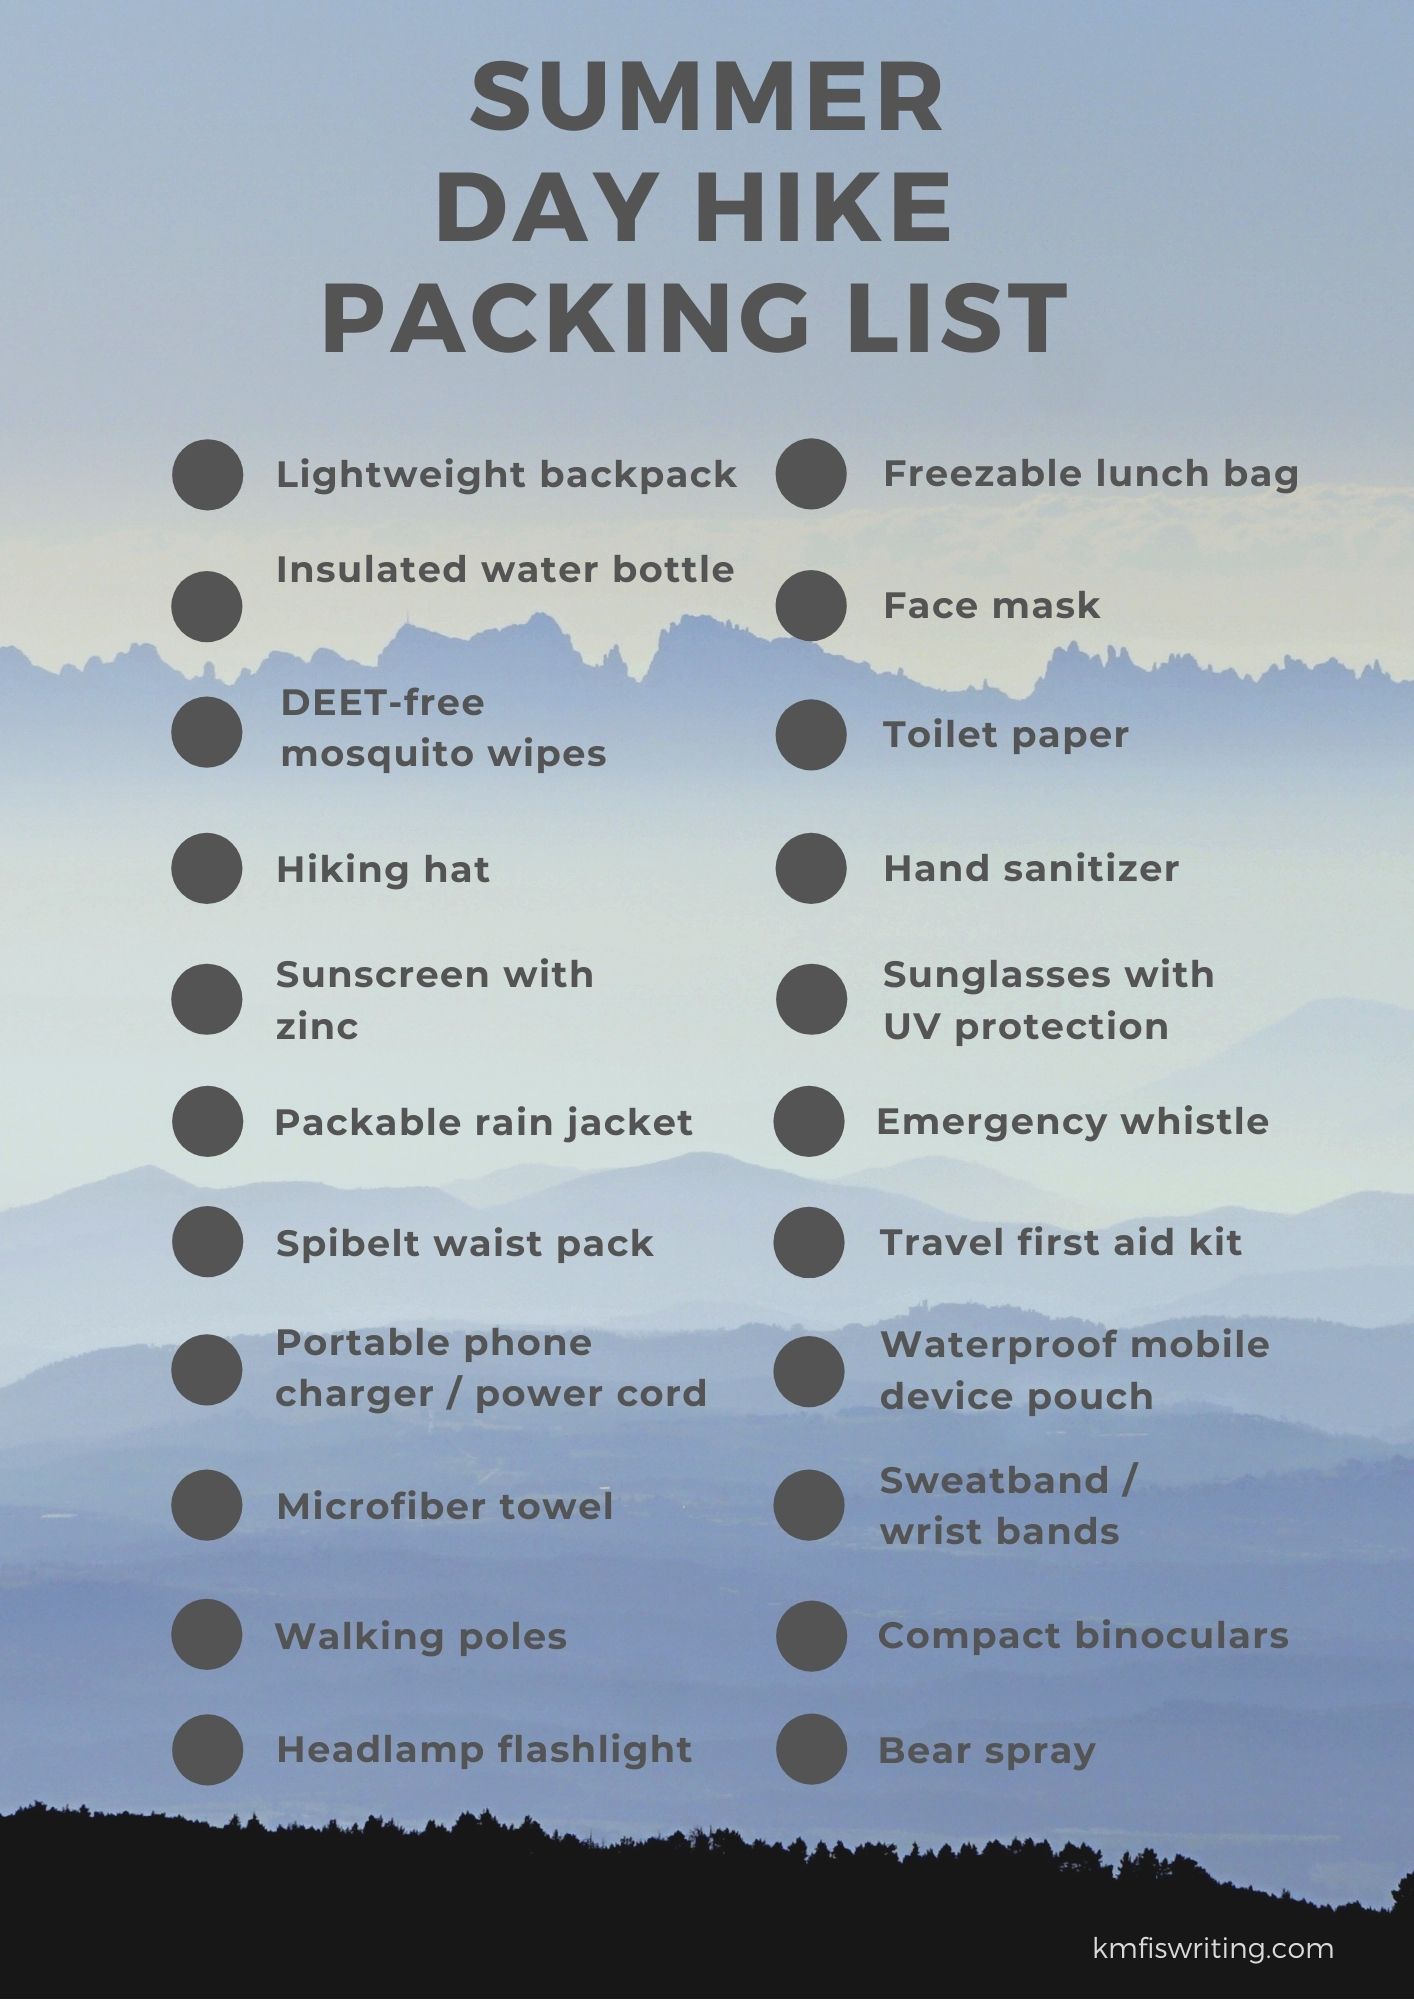 Best day hiking essentials packing list for summer - Best Day Hiking Essentials Packing List For Summer